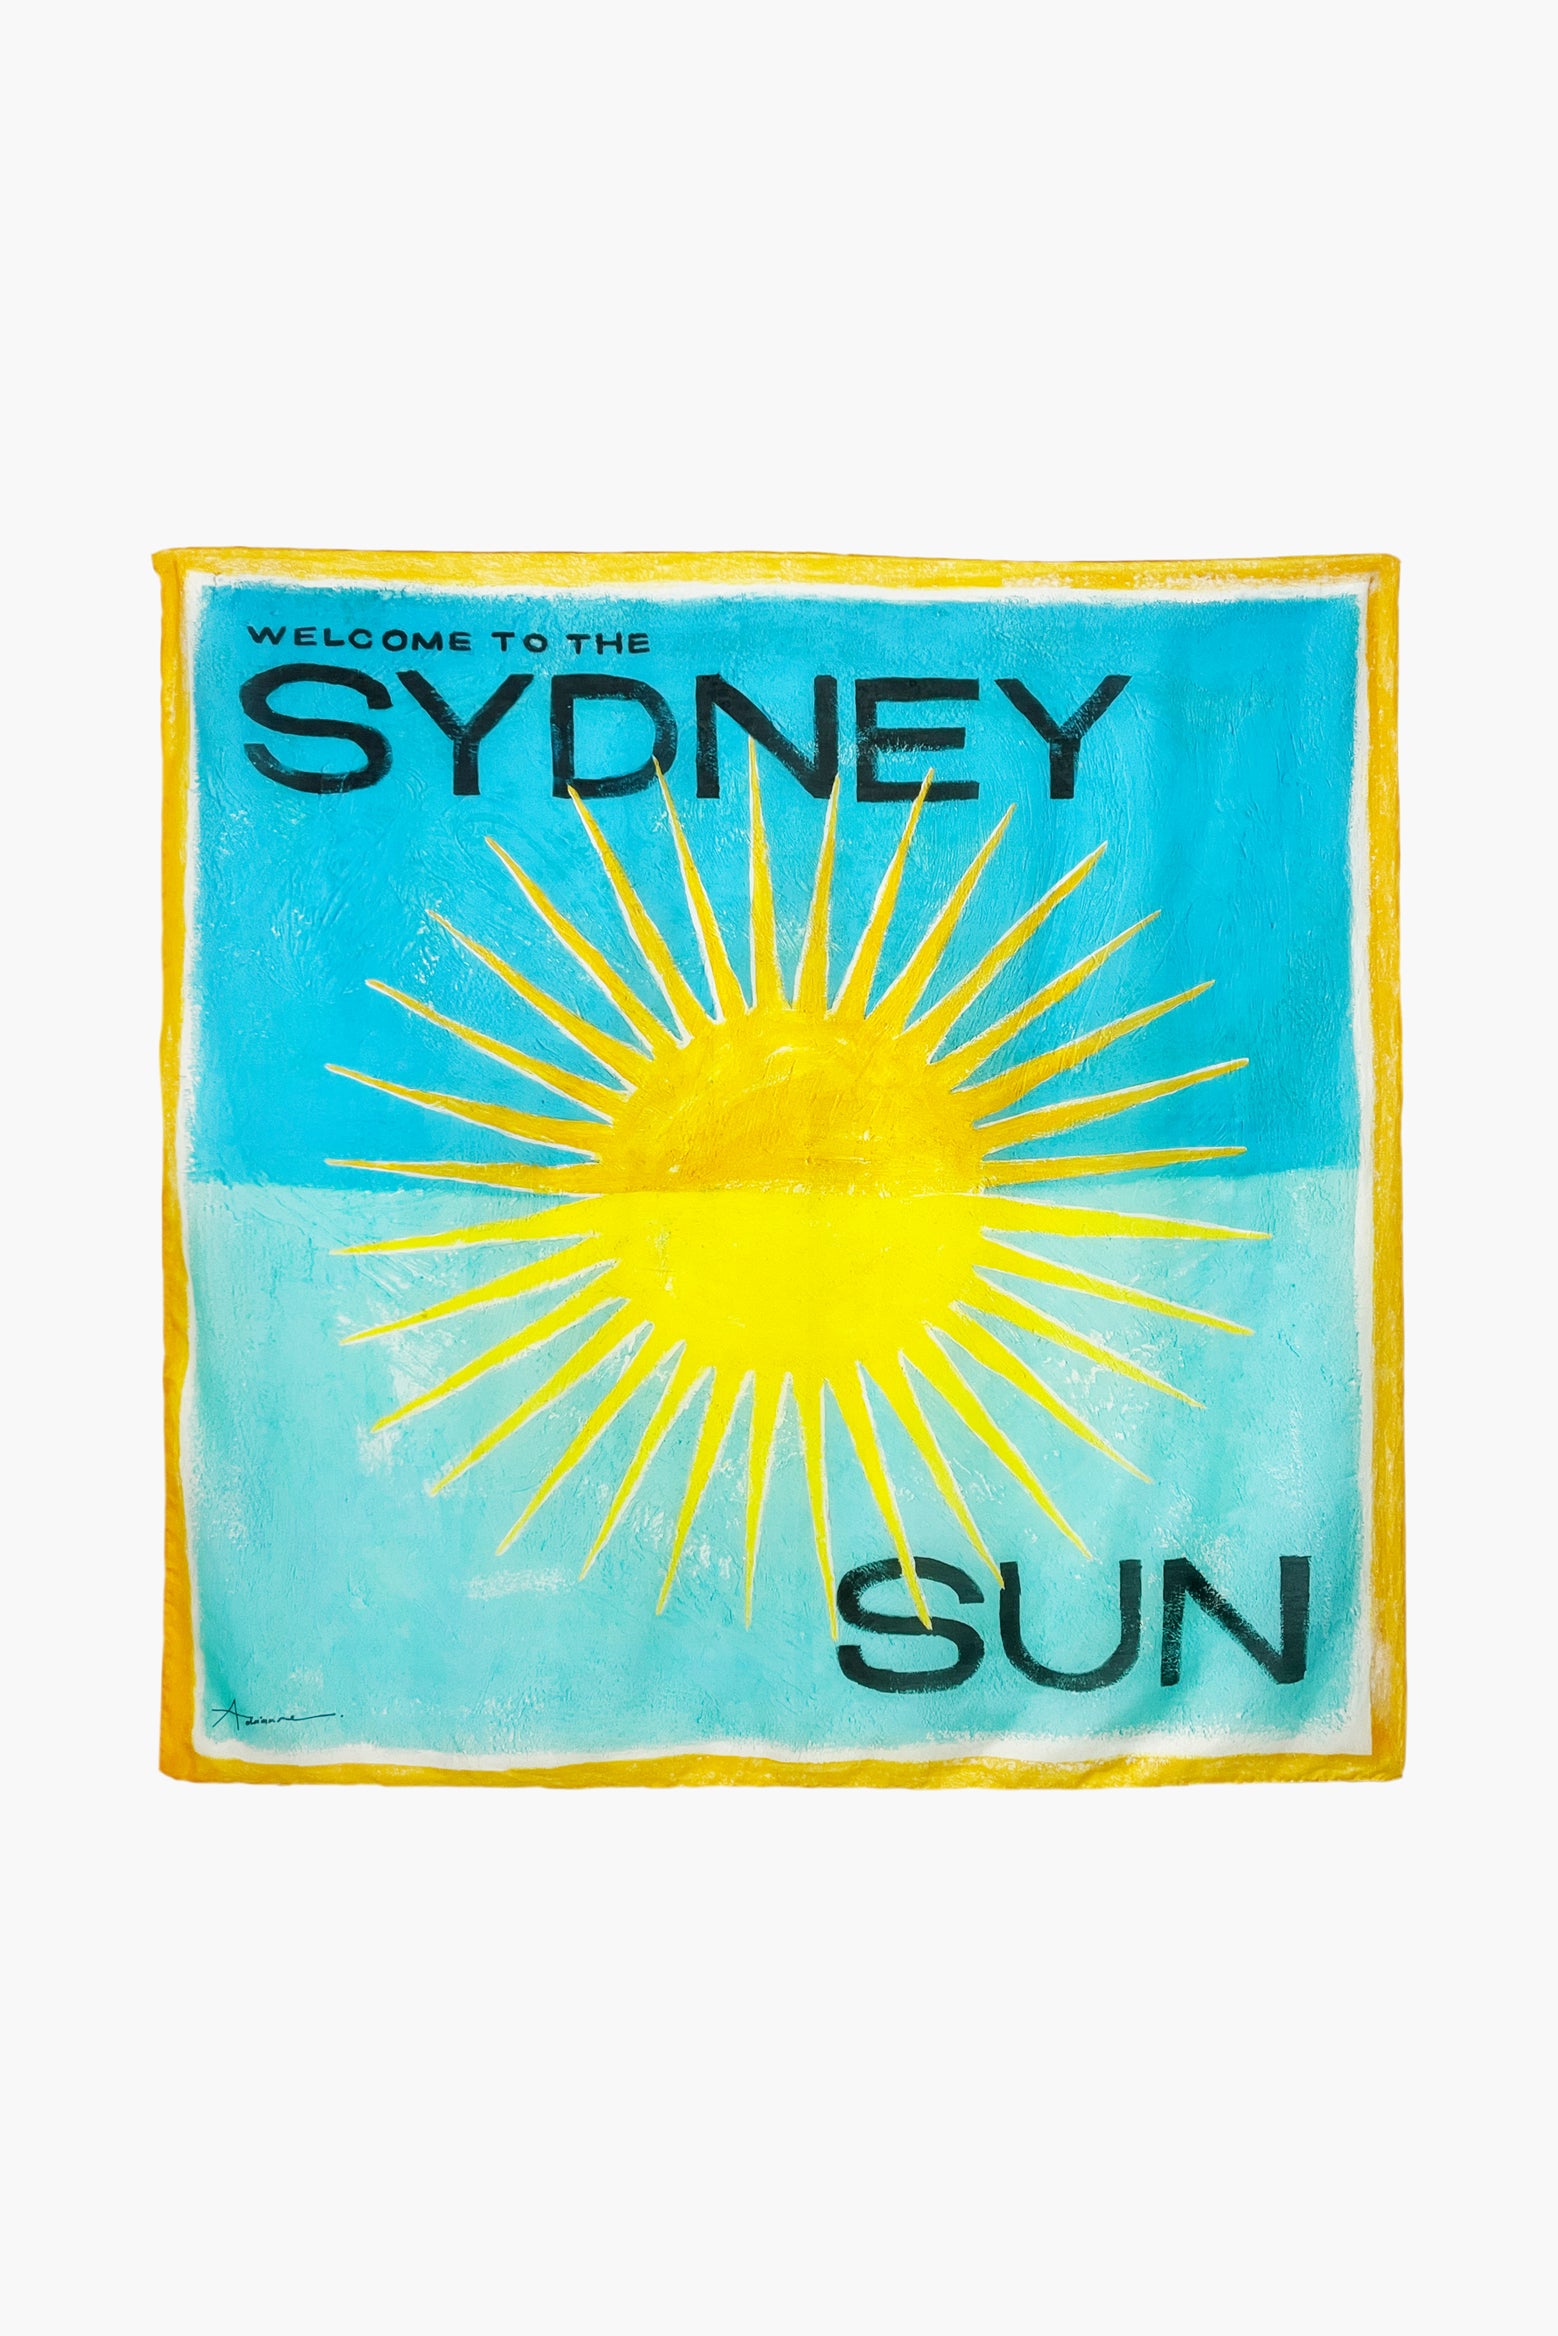 Atlas Travel Sarong in Sydney Sun available at The New Trend Australia.